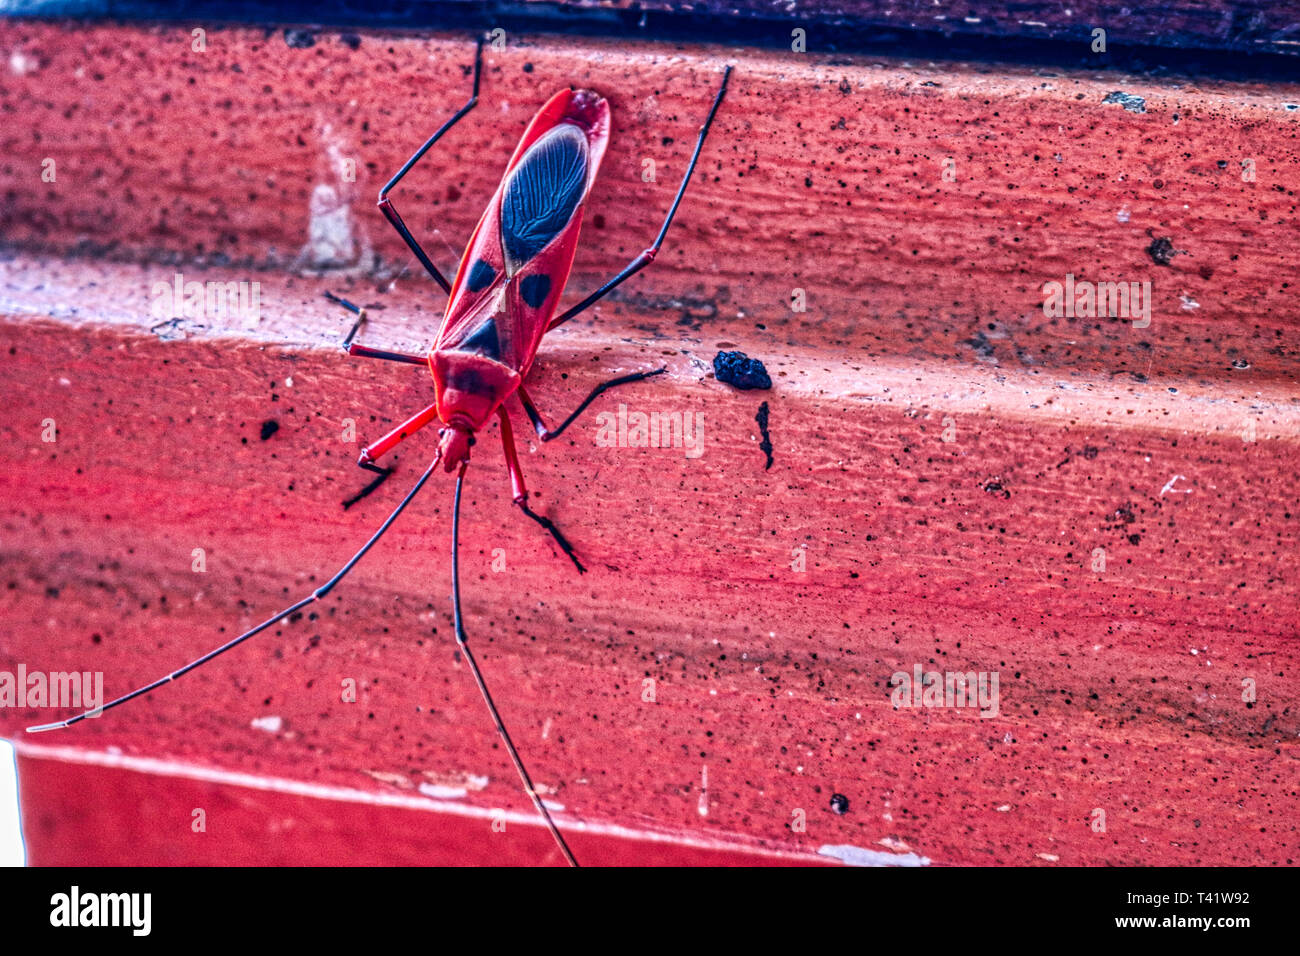 this unique photo shows the red beetle Kapok nigricornis Probergrothius. This insect is edible and is considered a delicacy in Thailand Stock Photo